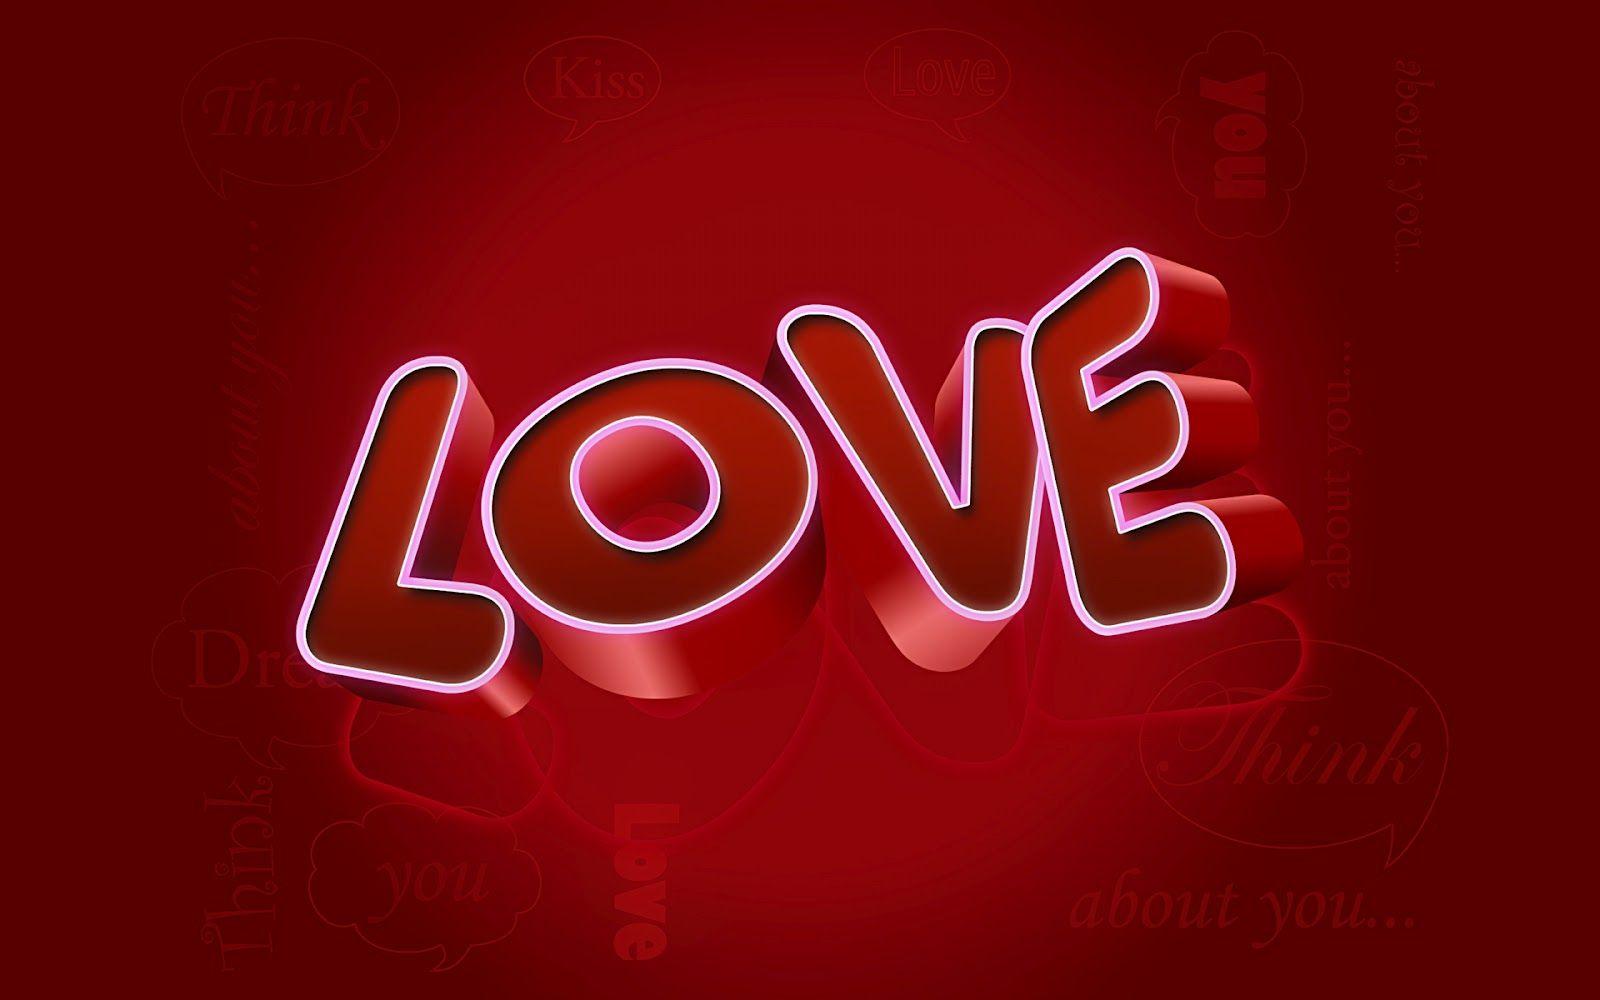 Fall In Love wallpapers Fall In Love stock photos